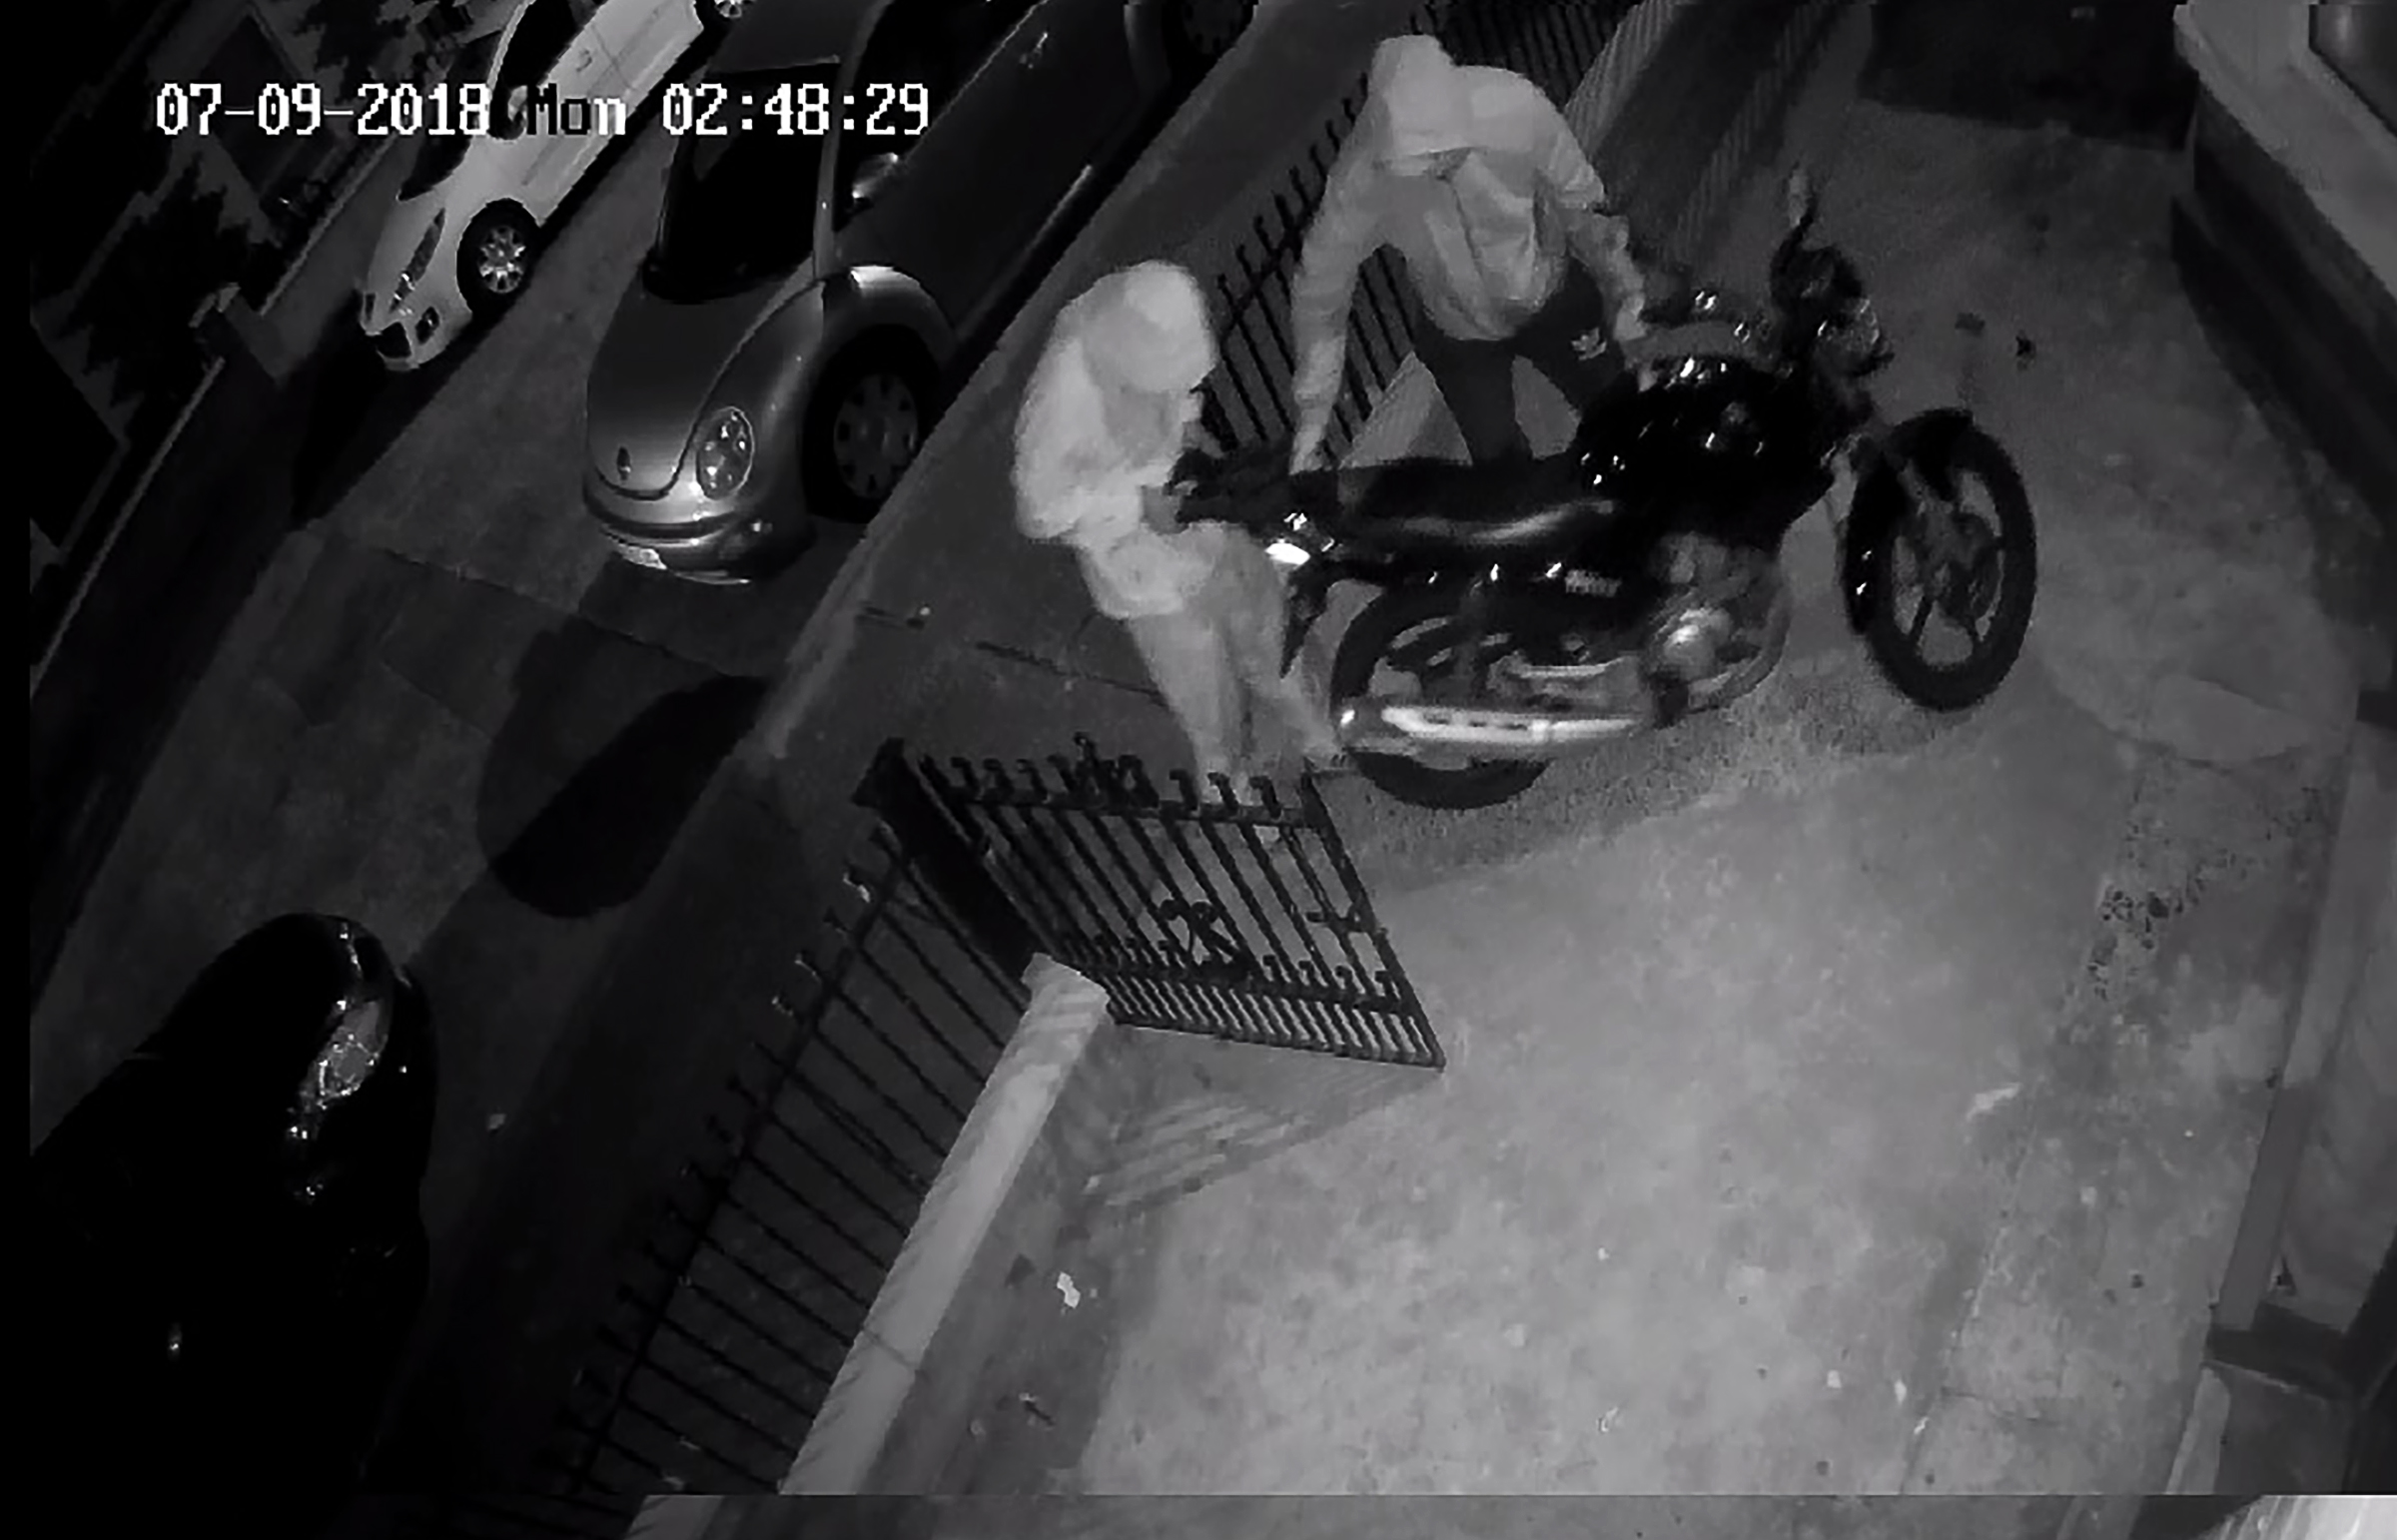 The thieves caught on CCTV taking bolt cutters to the motorcycle’s padlock